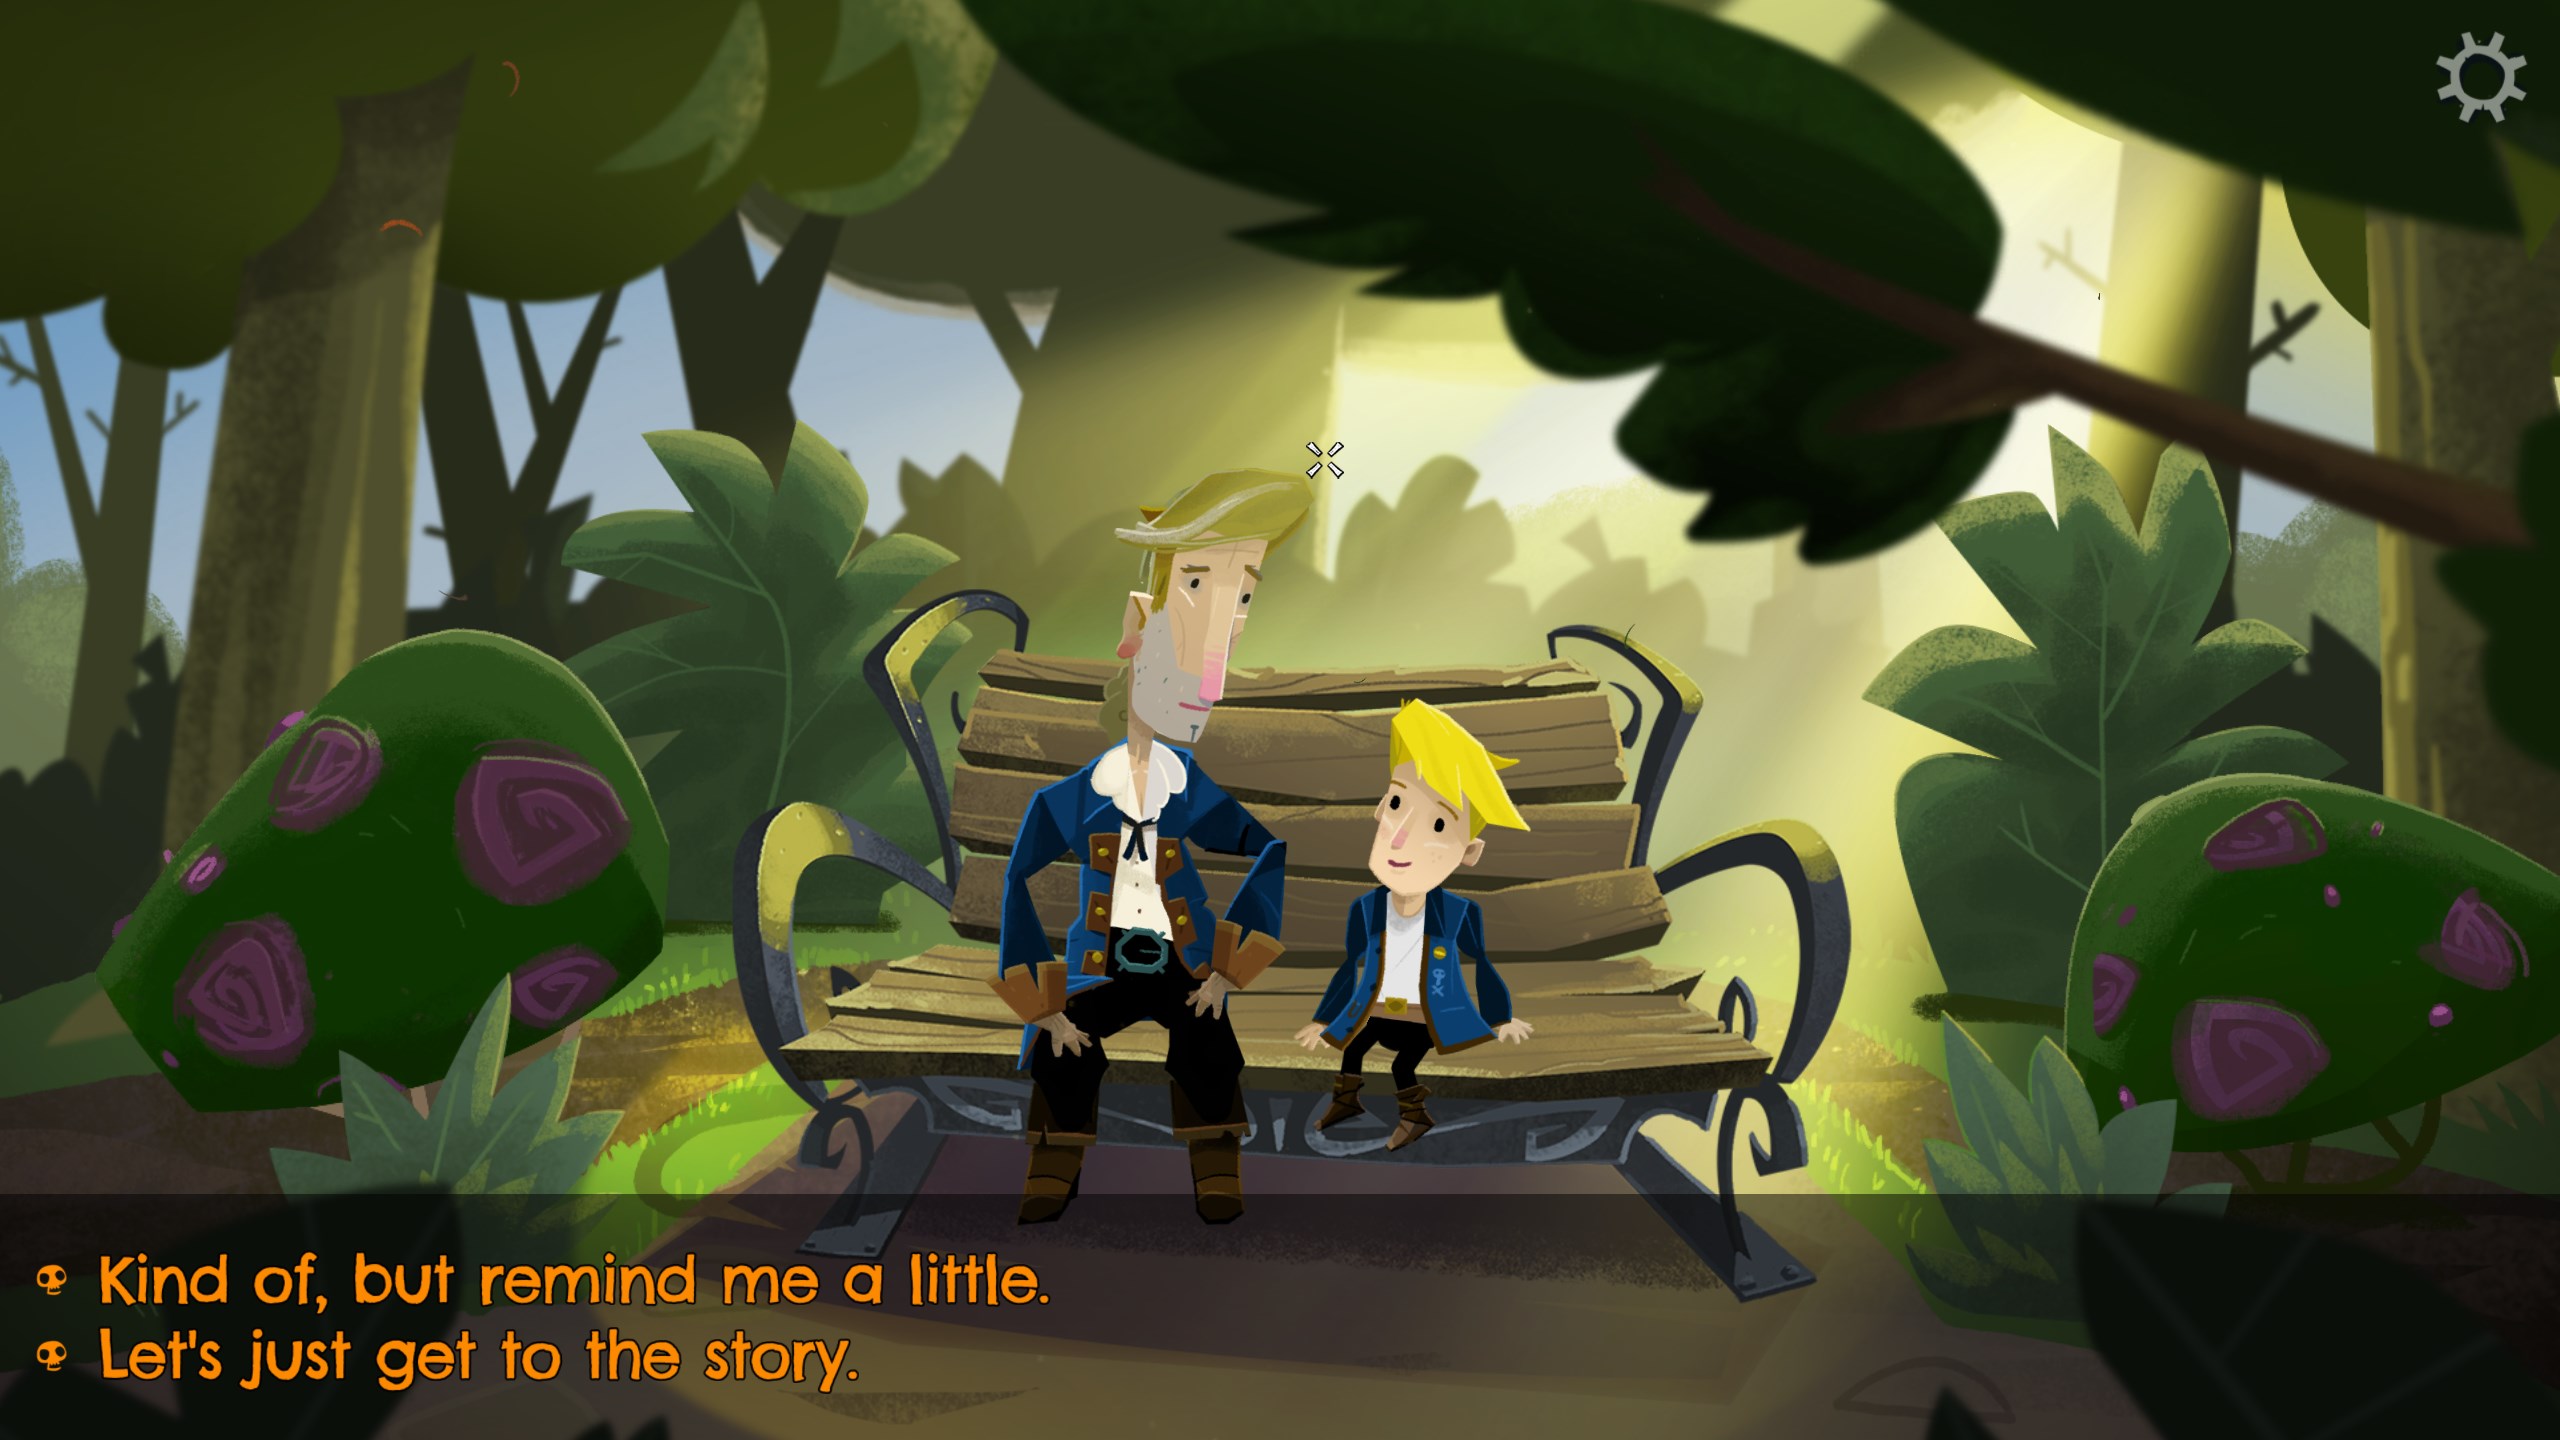 Guybrush and Boybrush on a bench, the dialog options read:
Kind of, but remind me a little.
And, Let's just get to the story.